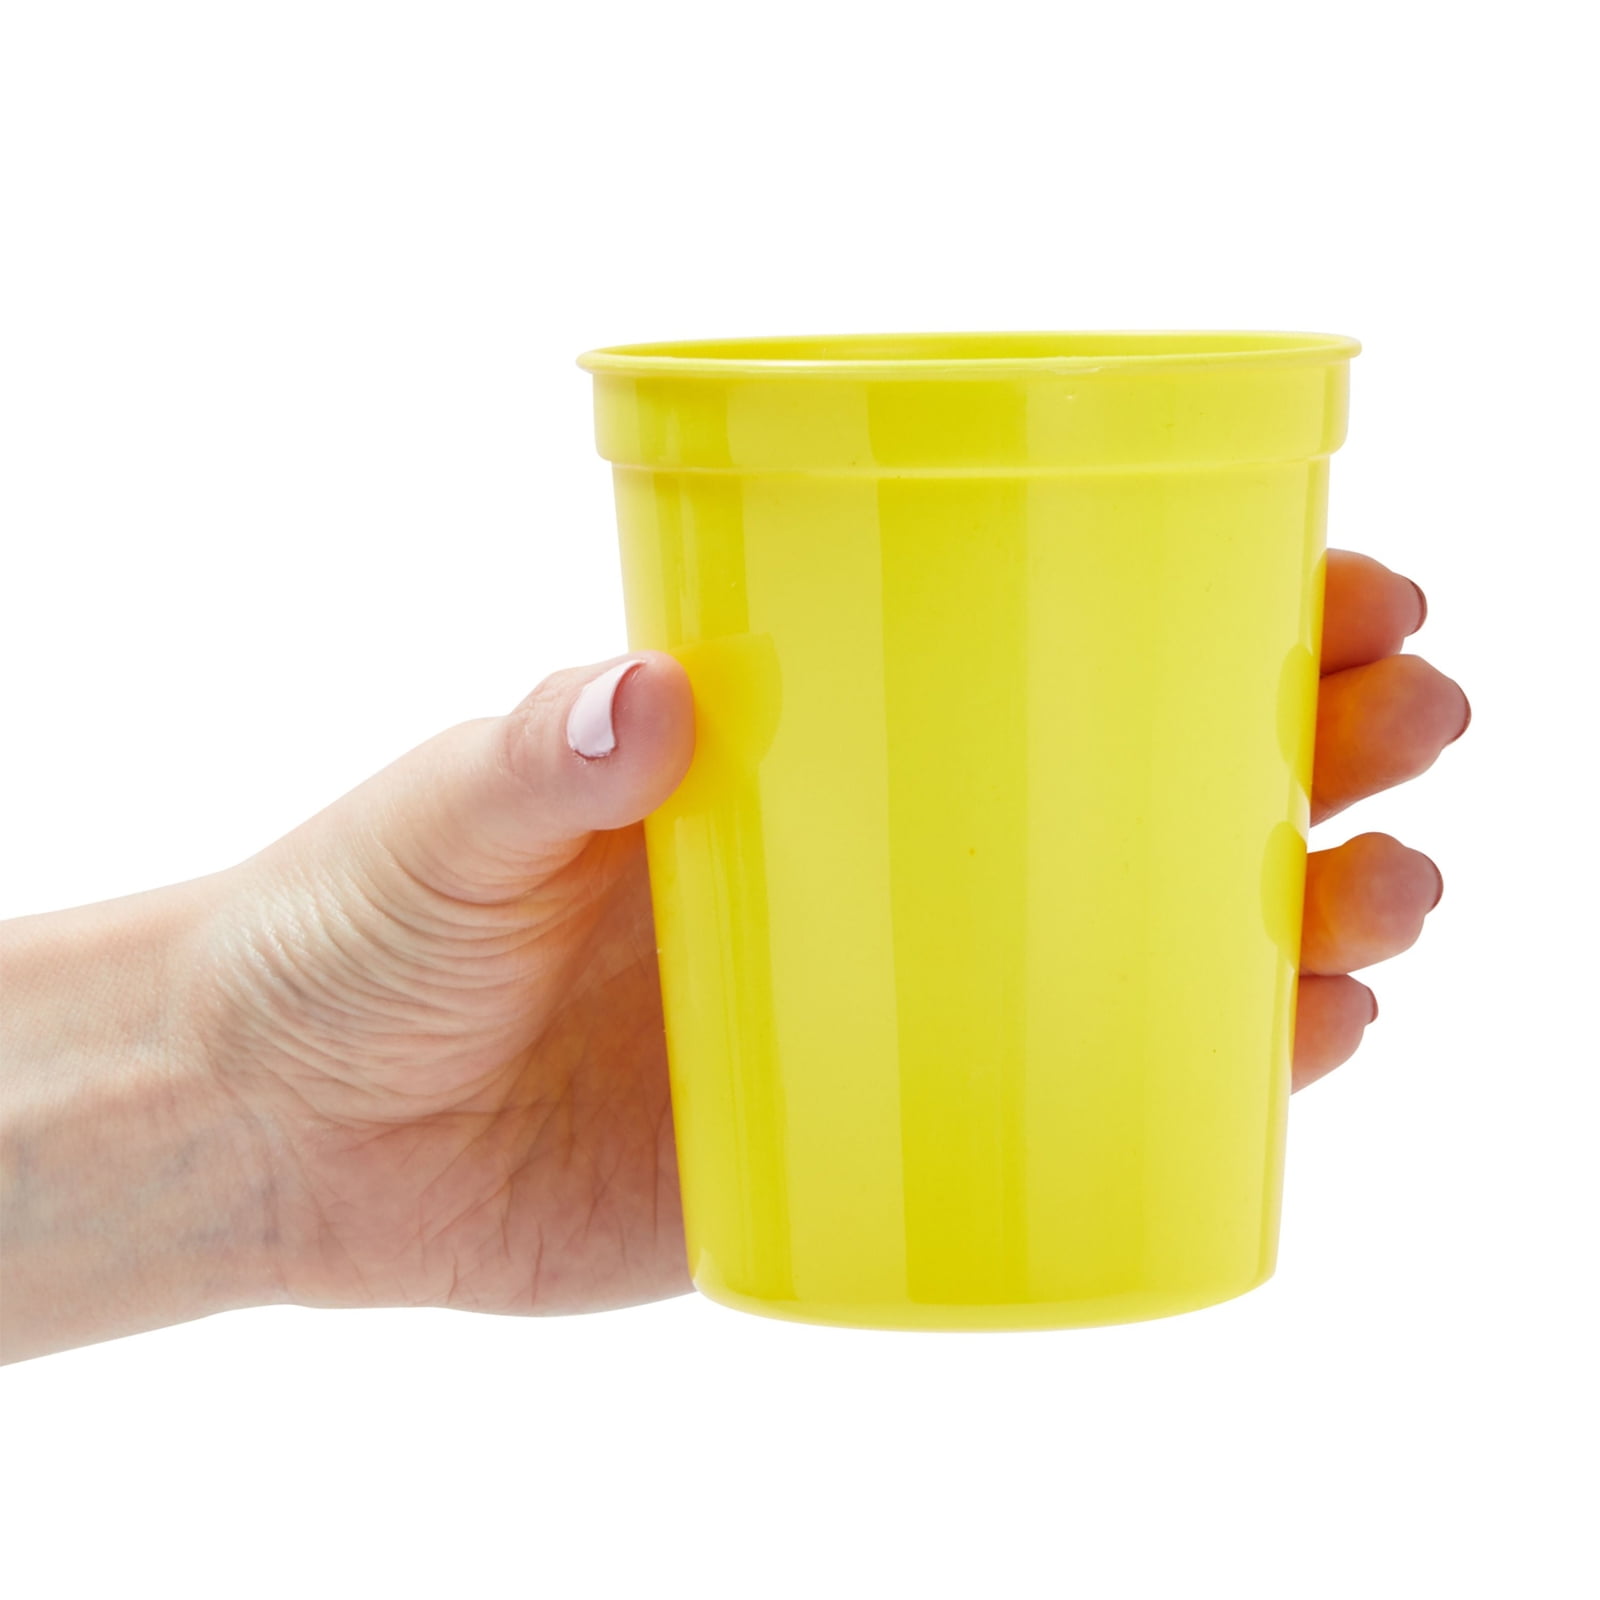 cssopenss 120 pcs 16 oz Yellow plastic cups 16 oz Yellow Drinking cups  Yellow plastic Disposable cup…See more cssopenss 120 pcs 16 oz Yellow  plastic